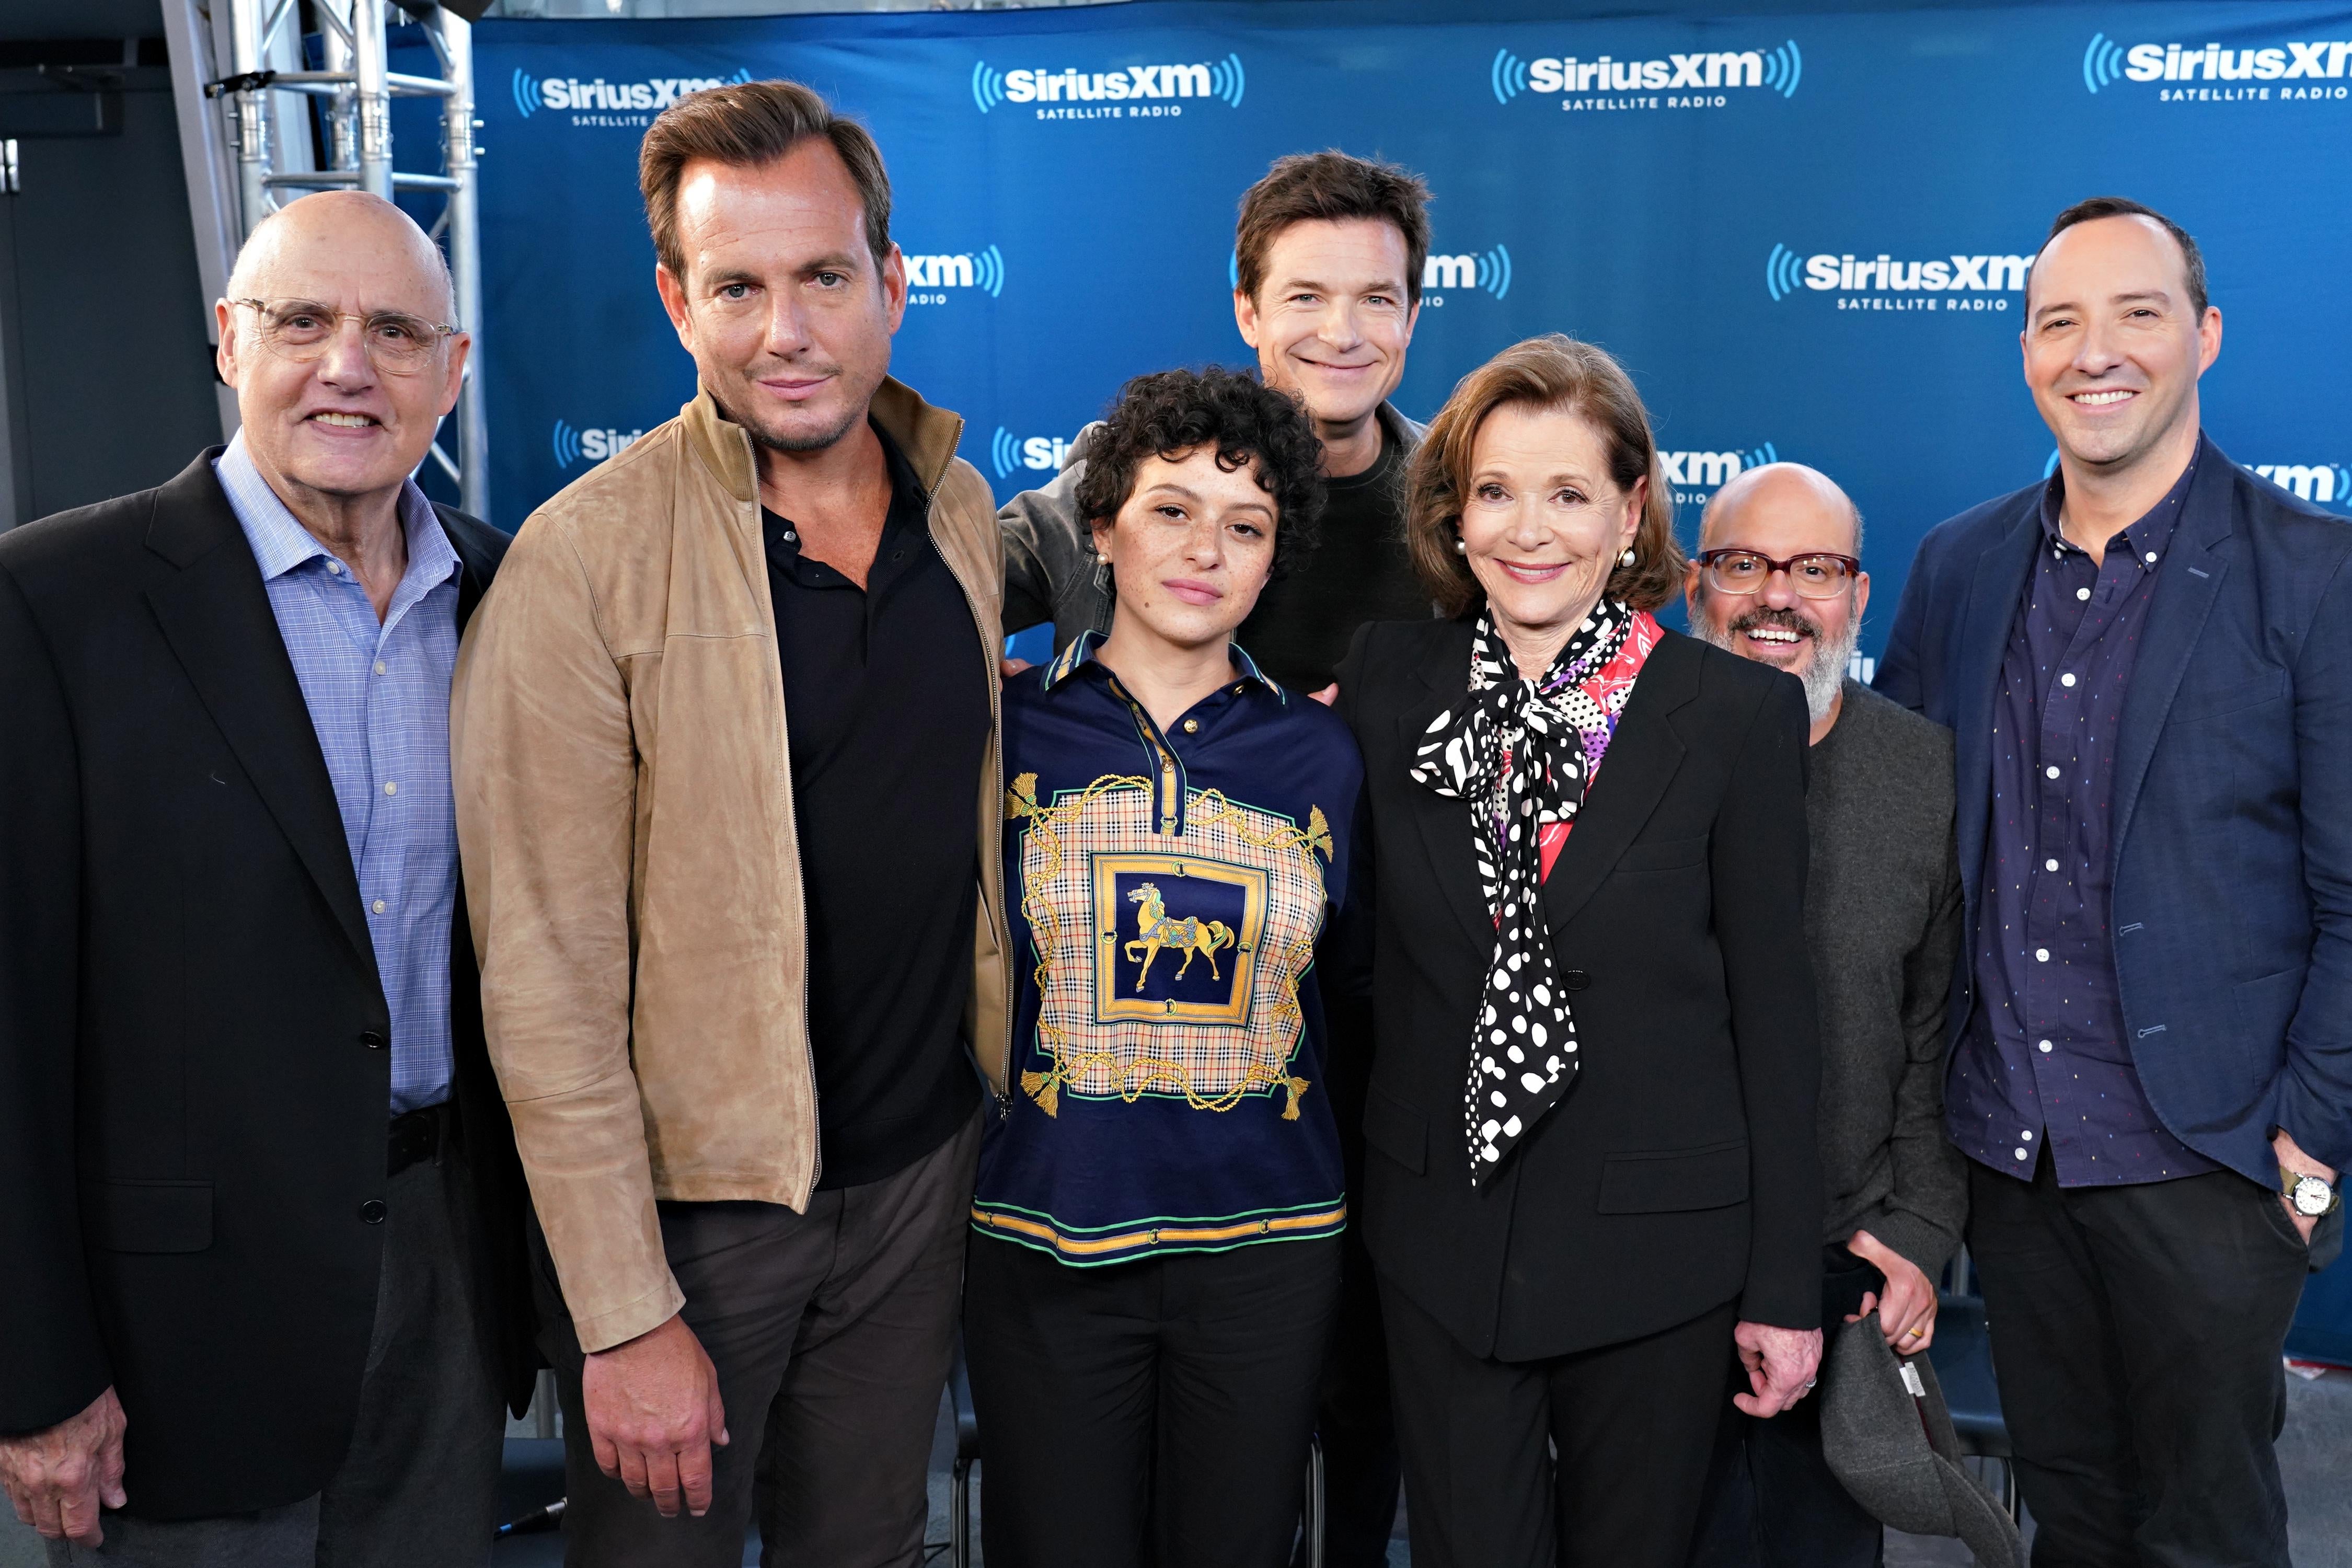 The cast of Arrested Development at a SiriusXM event in New York.